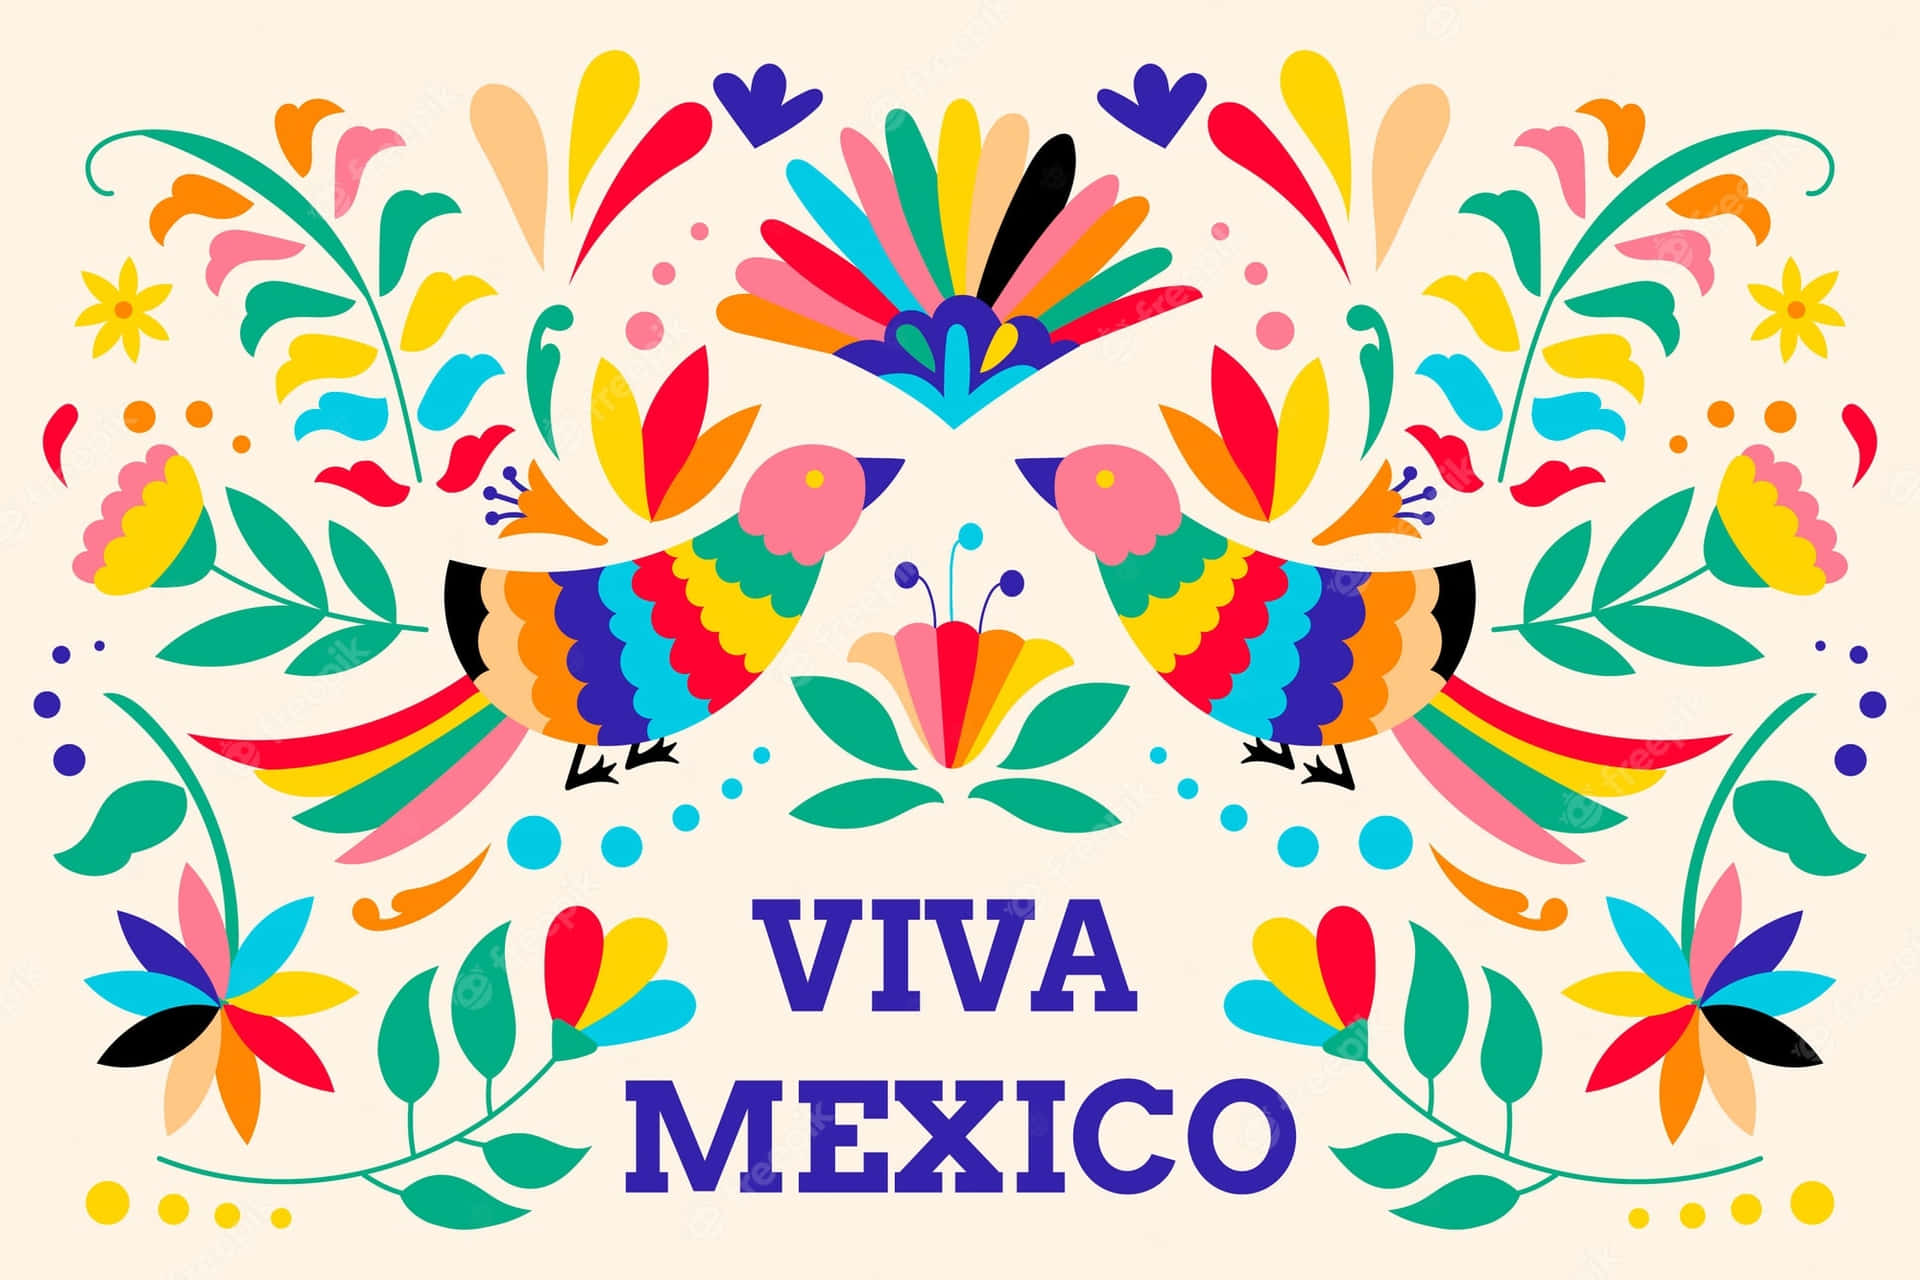 Viva Mexico - Colorful Mexican Art Background